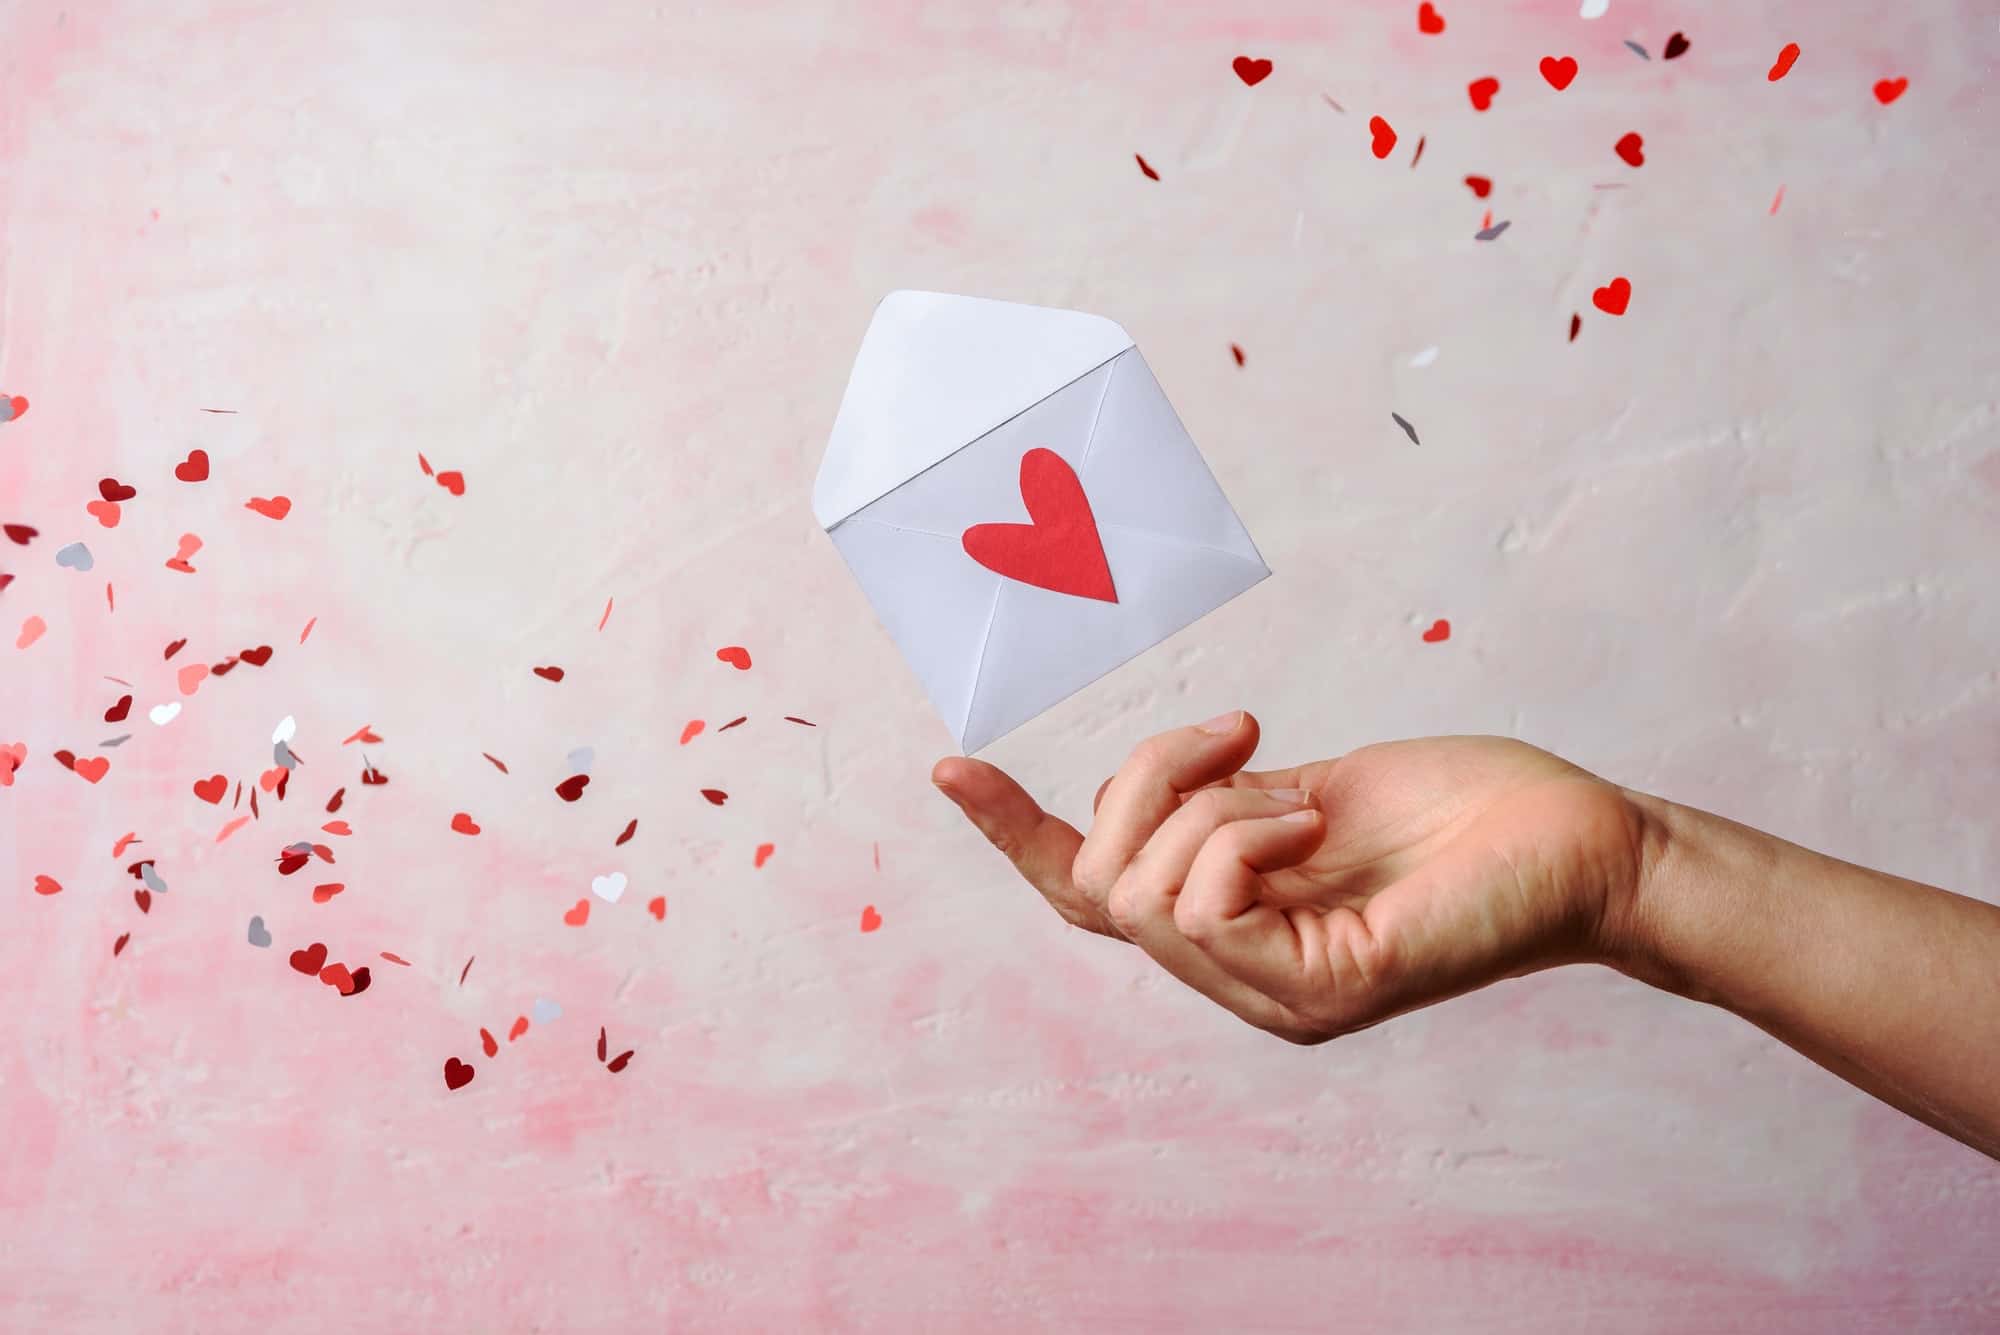 Envelope on hand with hearts